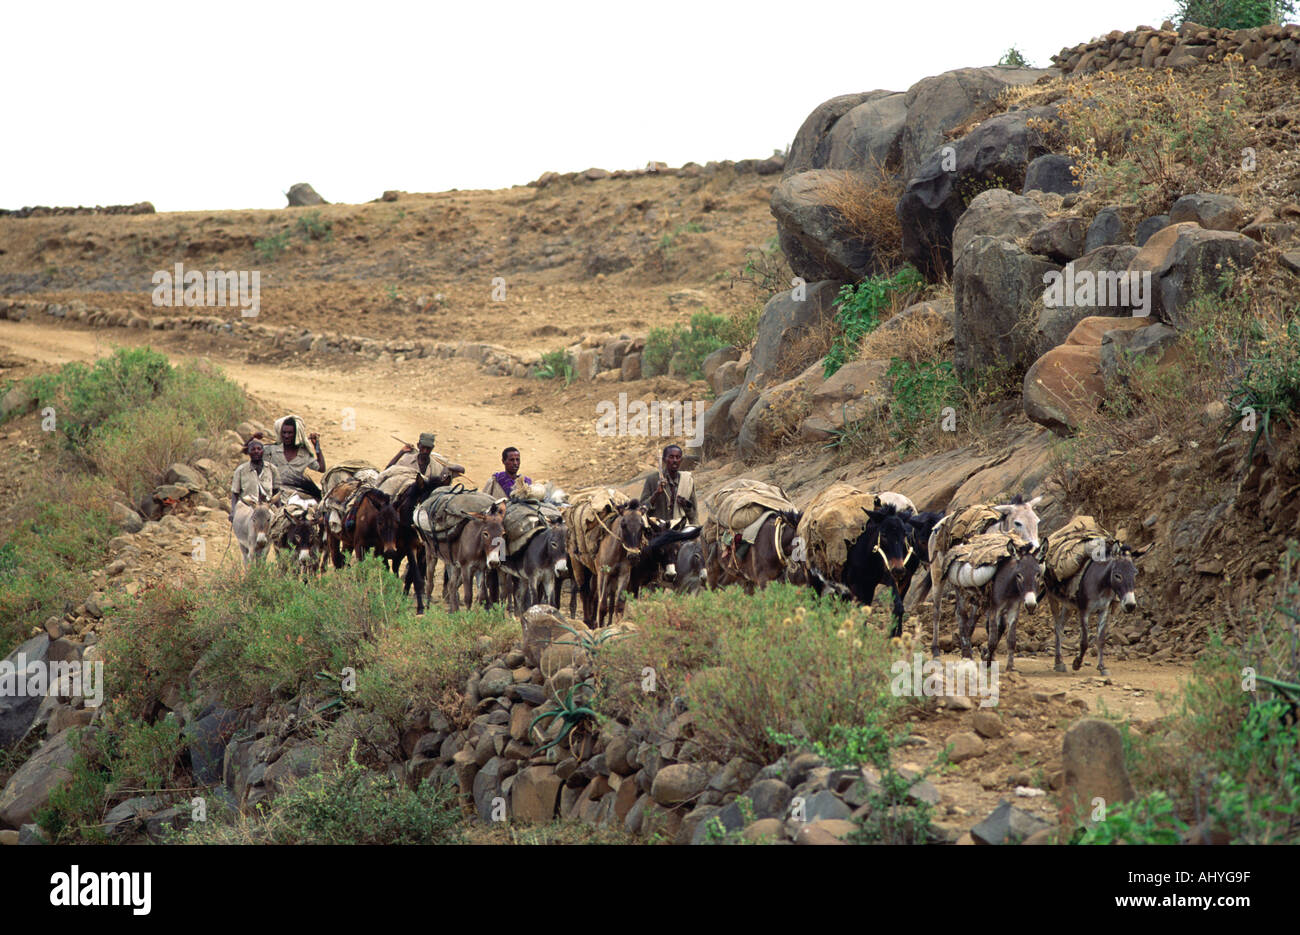 Ethiopian countrymen returning home from the market with their donkeys laden with food and supplies, near Mekelle, Tigray, northern Ethiopia Stock Photo